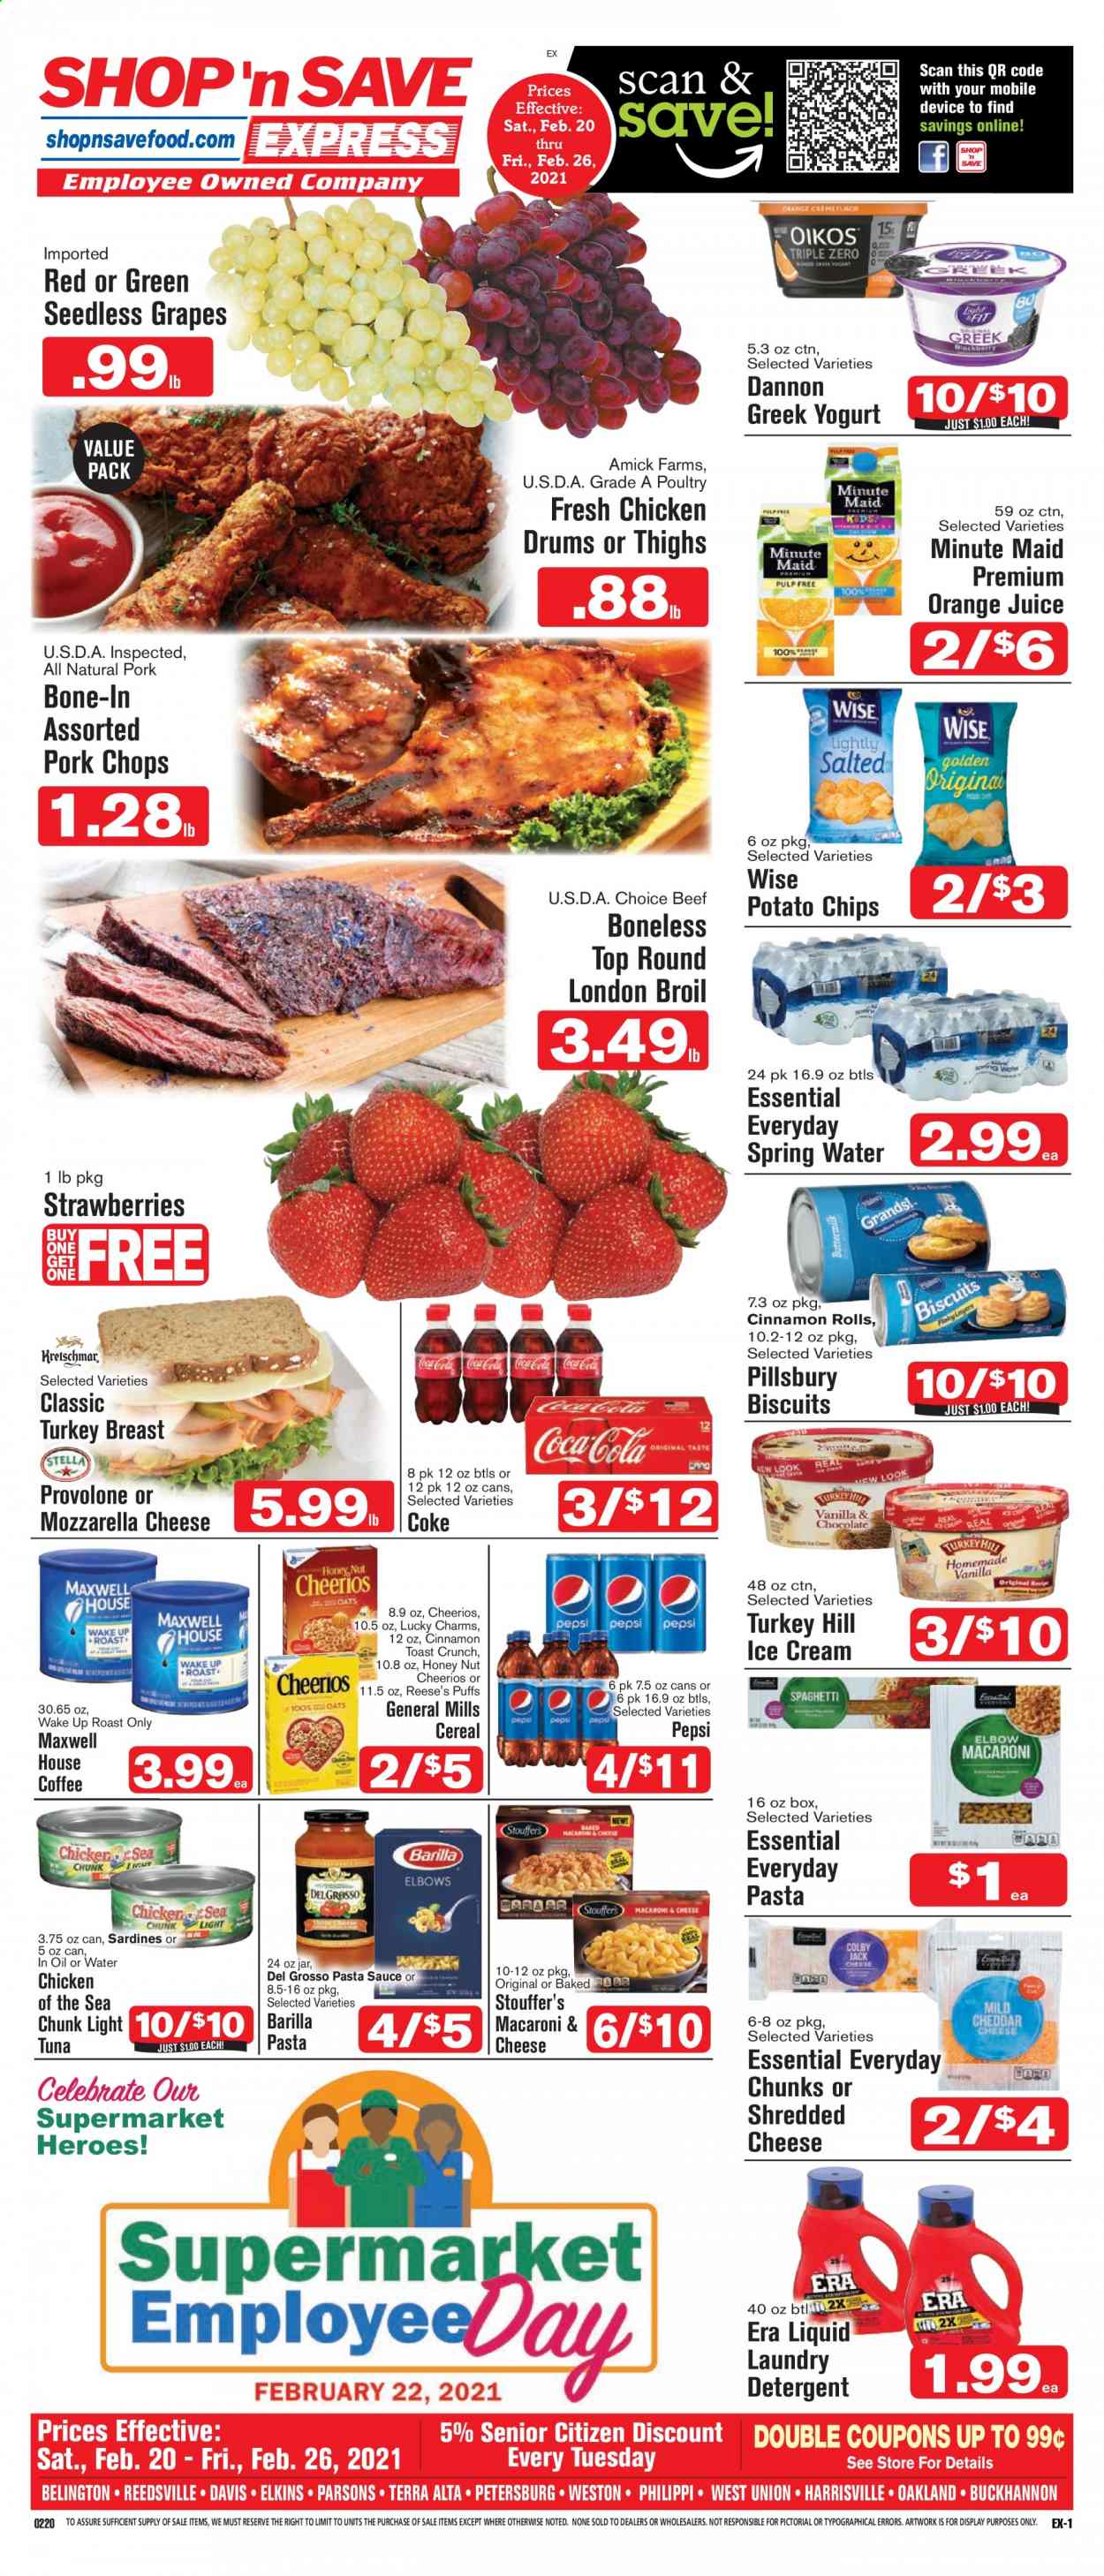 thumbnail - Shop ‘n Save Express Flyer - 02/20/2021 - 02/26/2021 - Sales products - seedless grapes, toast bread, cinnamon roll, puffs, turkey breast, pork chops, pork meat, sardines, tuna, Pillsbury, Barilla, Colby cheese, mozzarella, shredded cheese, greek yoghurt, yoghurt, Oikos, Dannon, ice cream, Reese's, strawberries, Stouffer's, biscuit, potato chips, chips, Chicken of the Sea, cereals, Cheerios, spaghetti, macaroni, pasta sauce, Coca-Cola, Pepsi, orange juice, juice, spring water, Maxwell House, coffee, detergent, laundry detergent, grapes. Page 1.